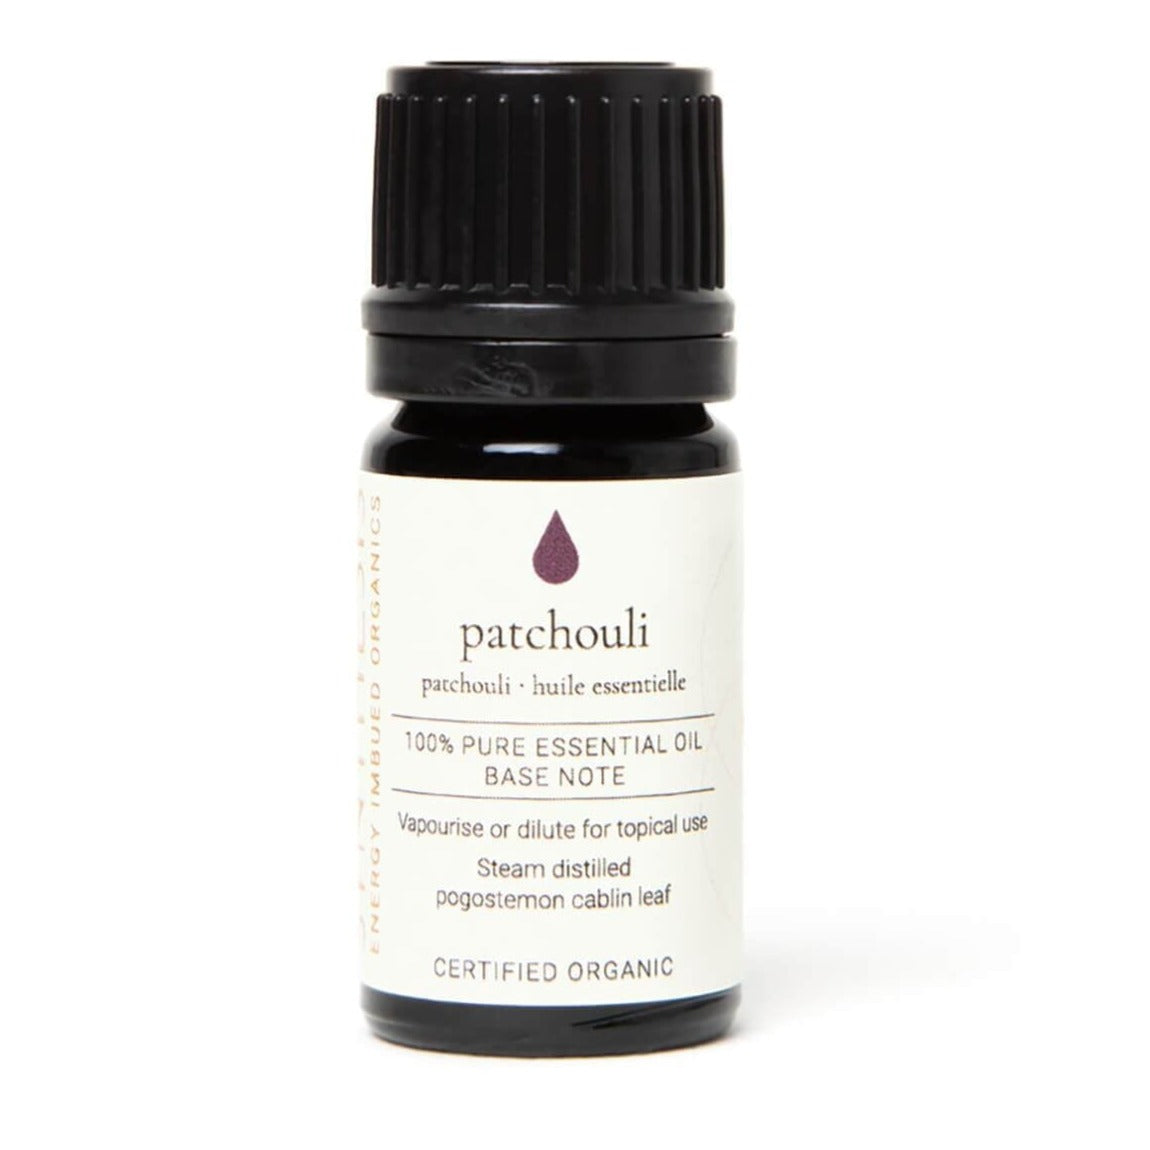 Patchouli Certified Organic Essential Oil aroma Synthesis Organics